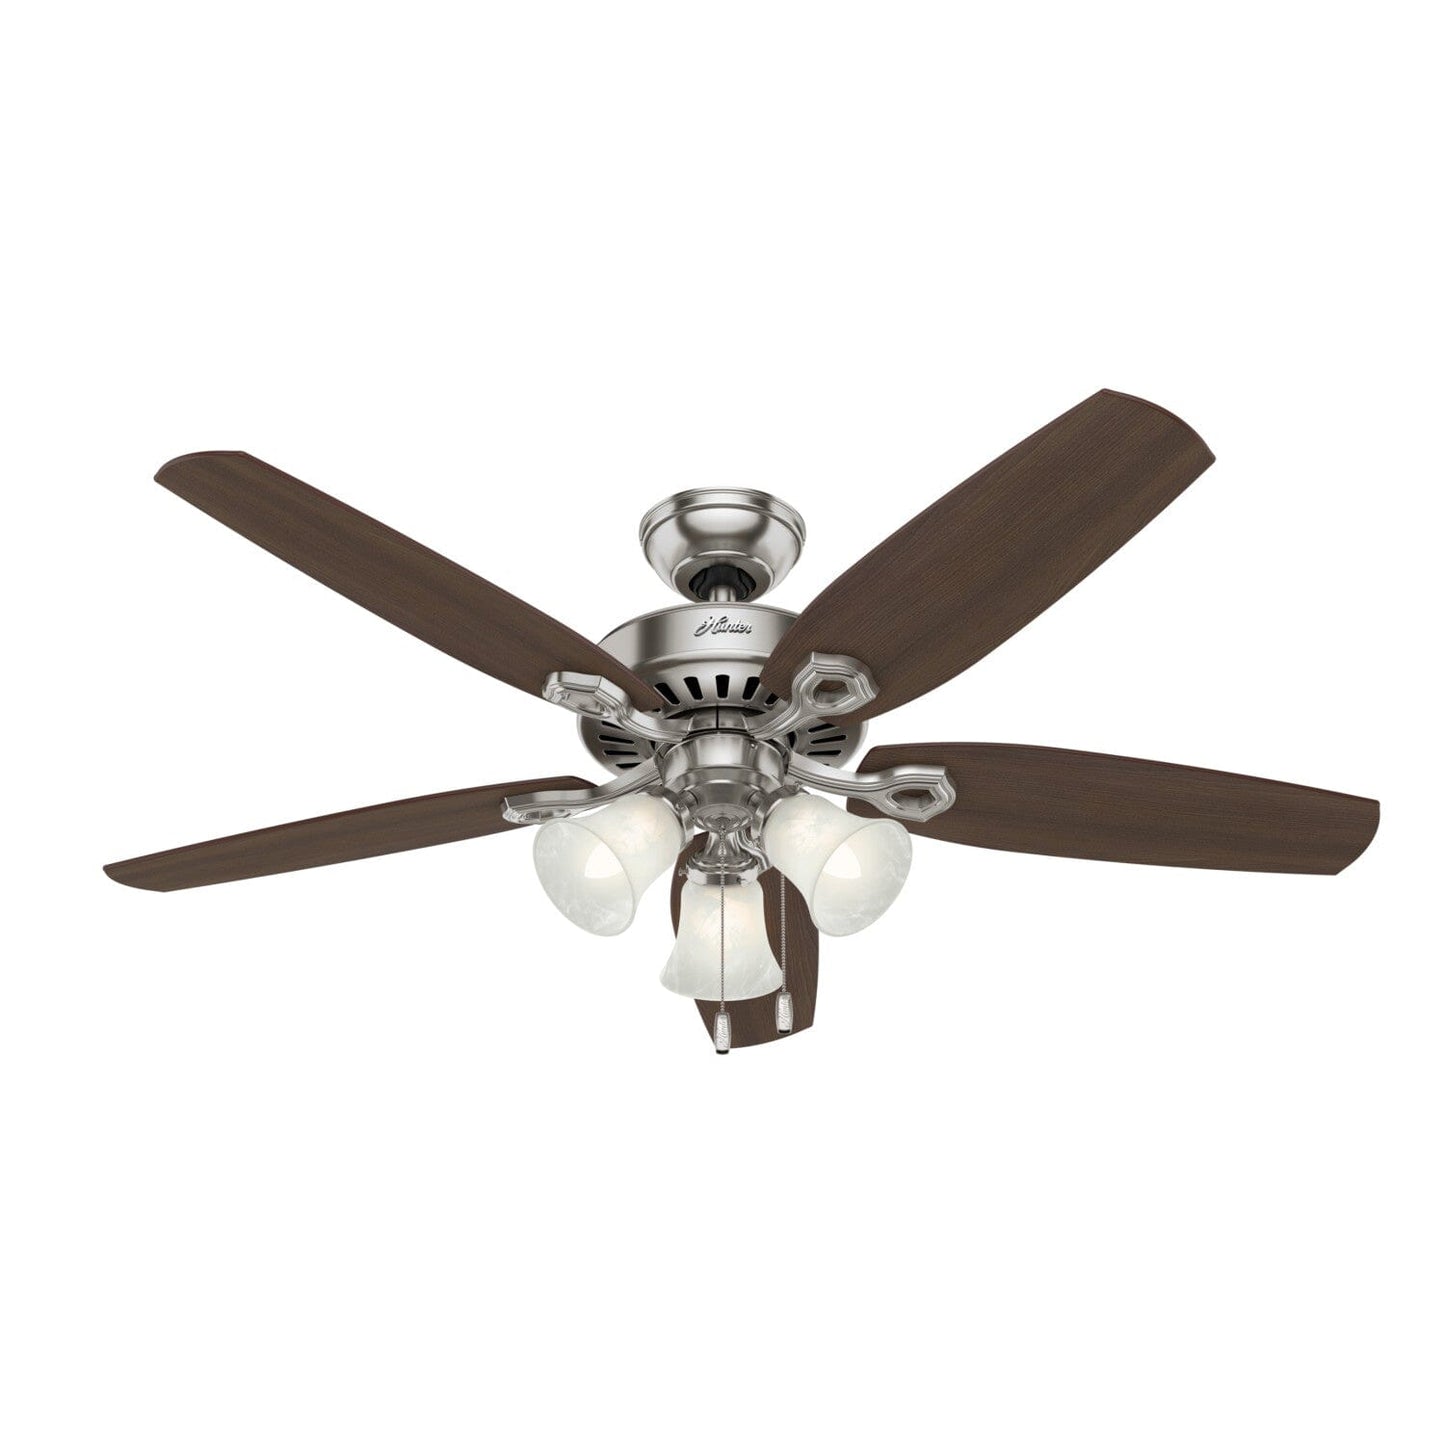 Builder Plus with 3 Lights 52 inch Ceiling Fans Hunter Brushed Nickel - Brazilian Cherry 